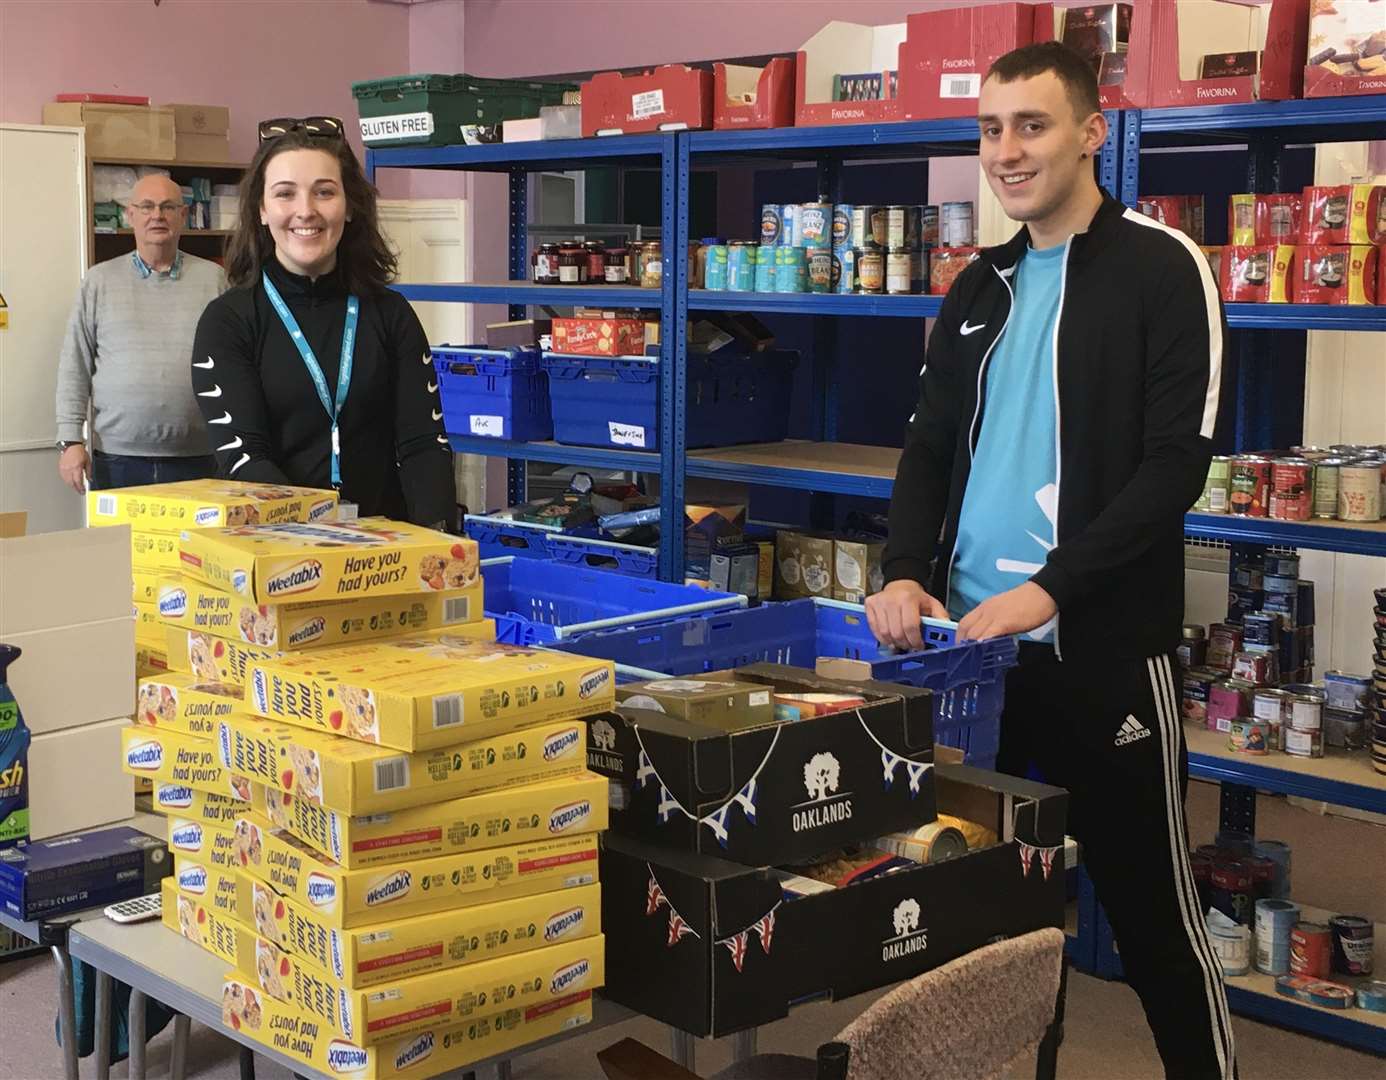 Chloe Mackay and Ryan Edwards from High Life Highland at Caithness Foodbank in Wick, helping with organising food parcels and then delivering them in the community. Looking on is Caithness Foodbank chairman Grant Ramsay.